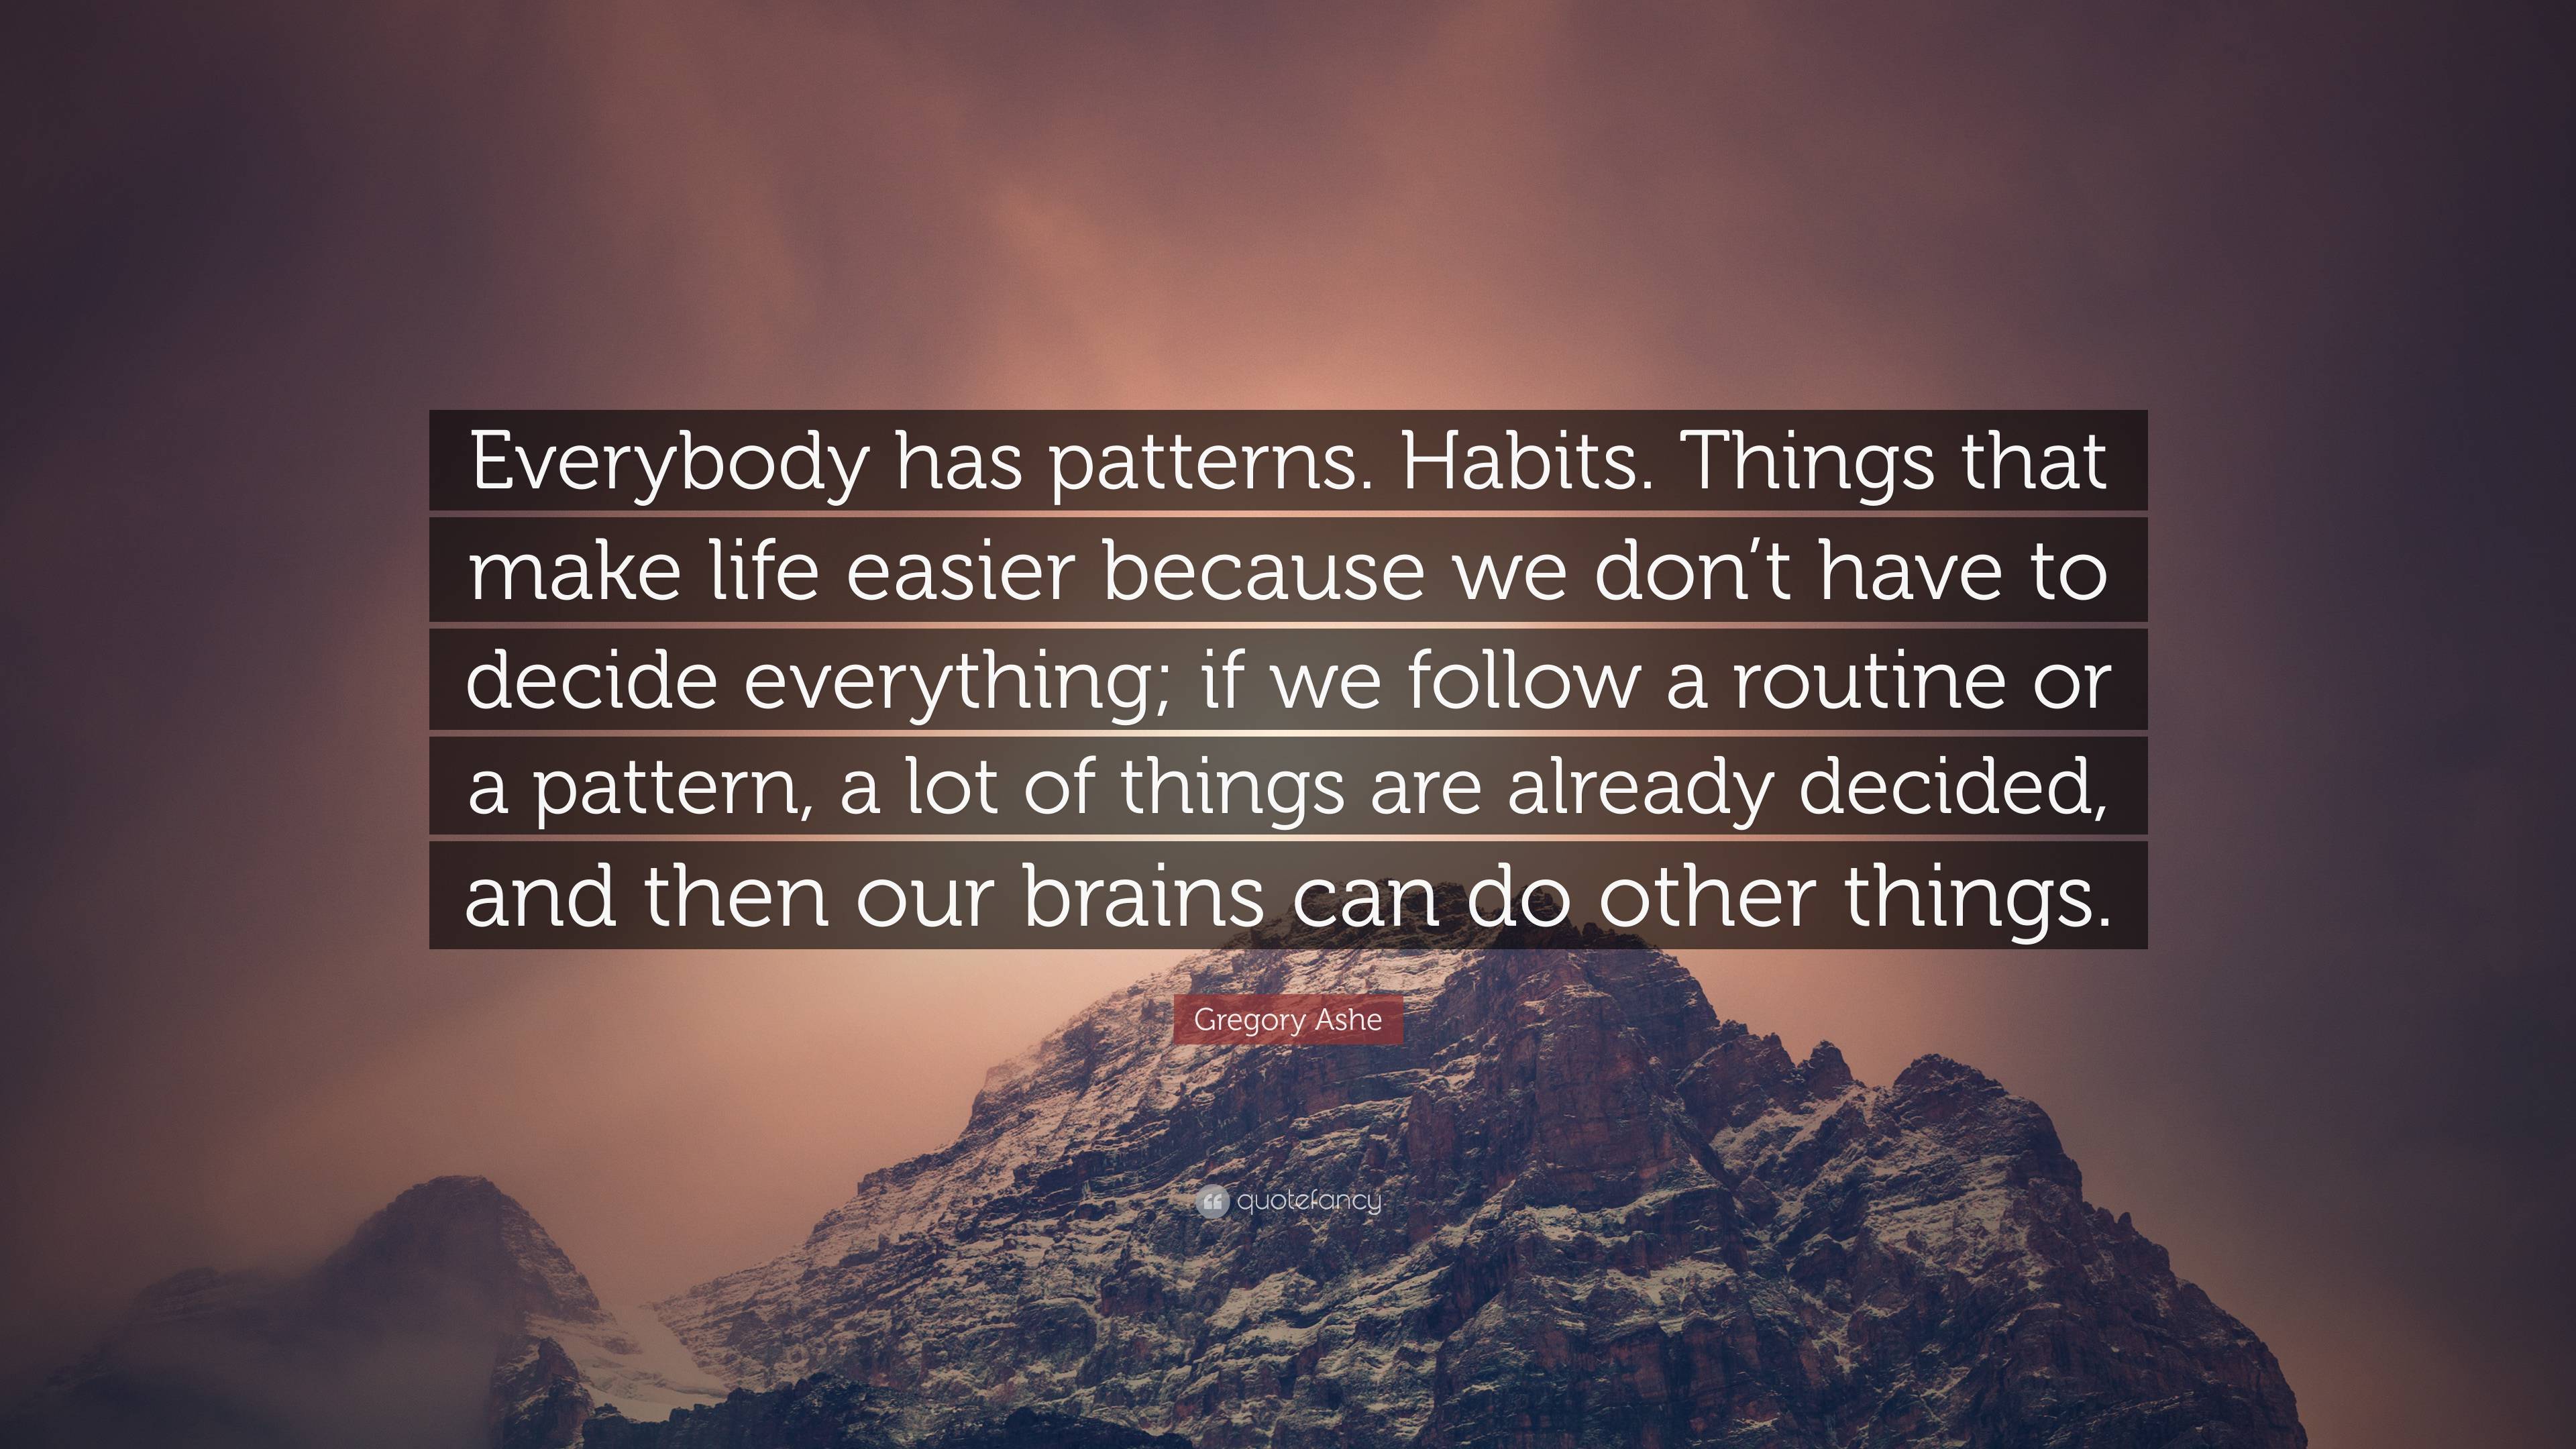 Gregory Ashe Quote: “Everybody has patterns. Habits. Things that make life  easier because we don't have to decide everything; if we follow a ”